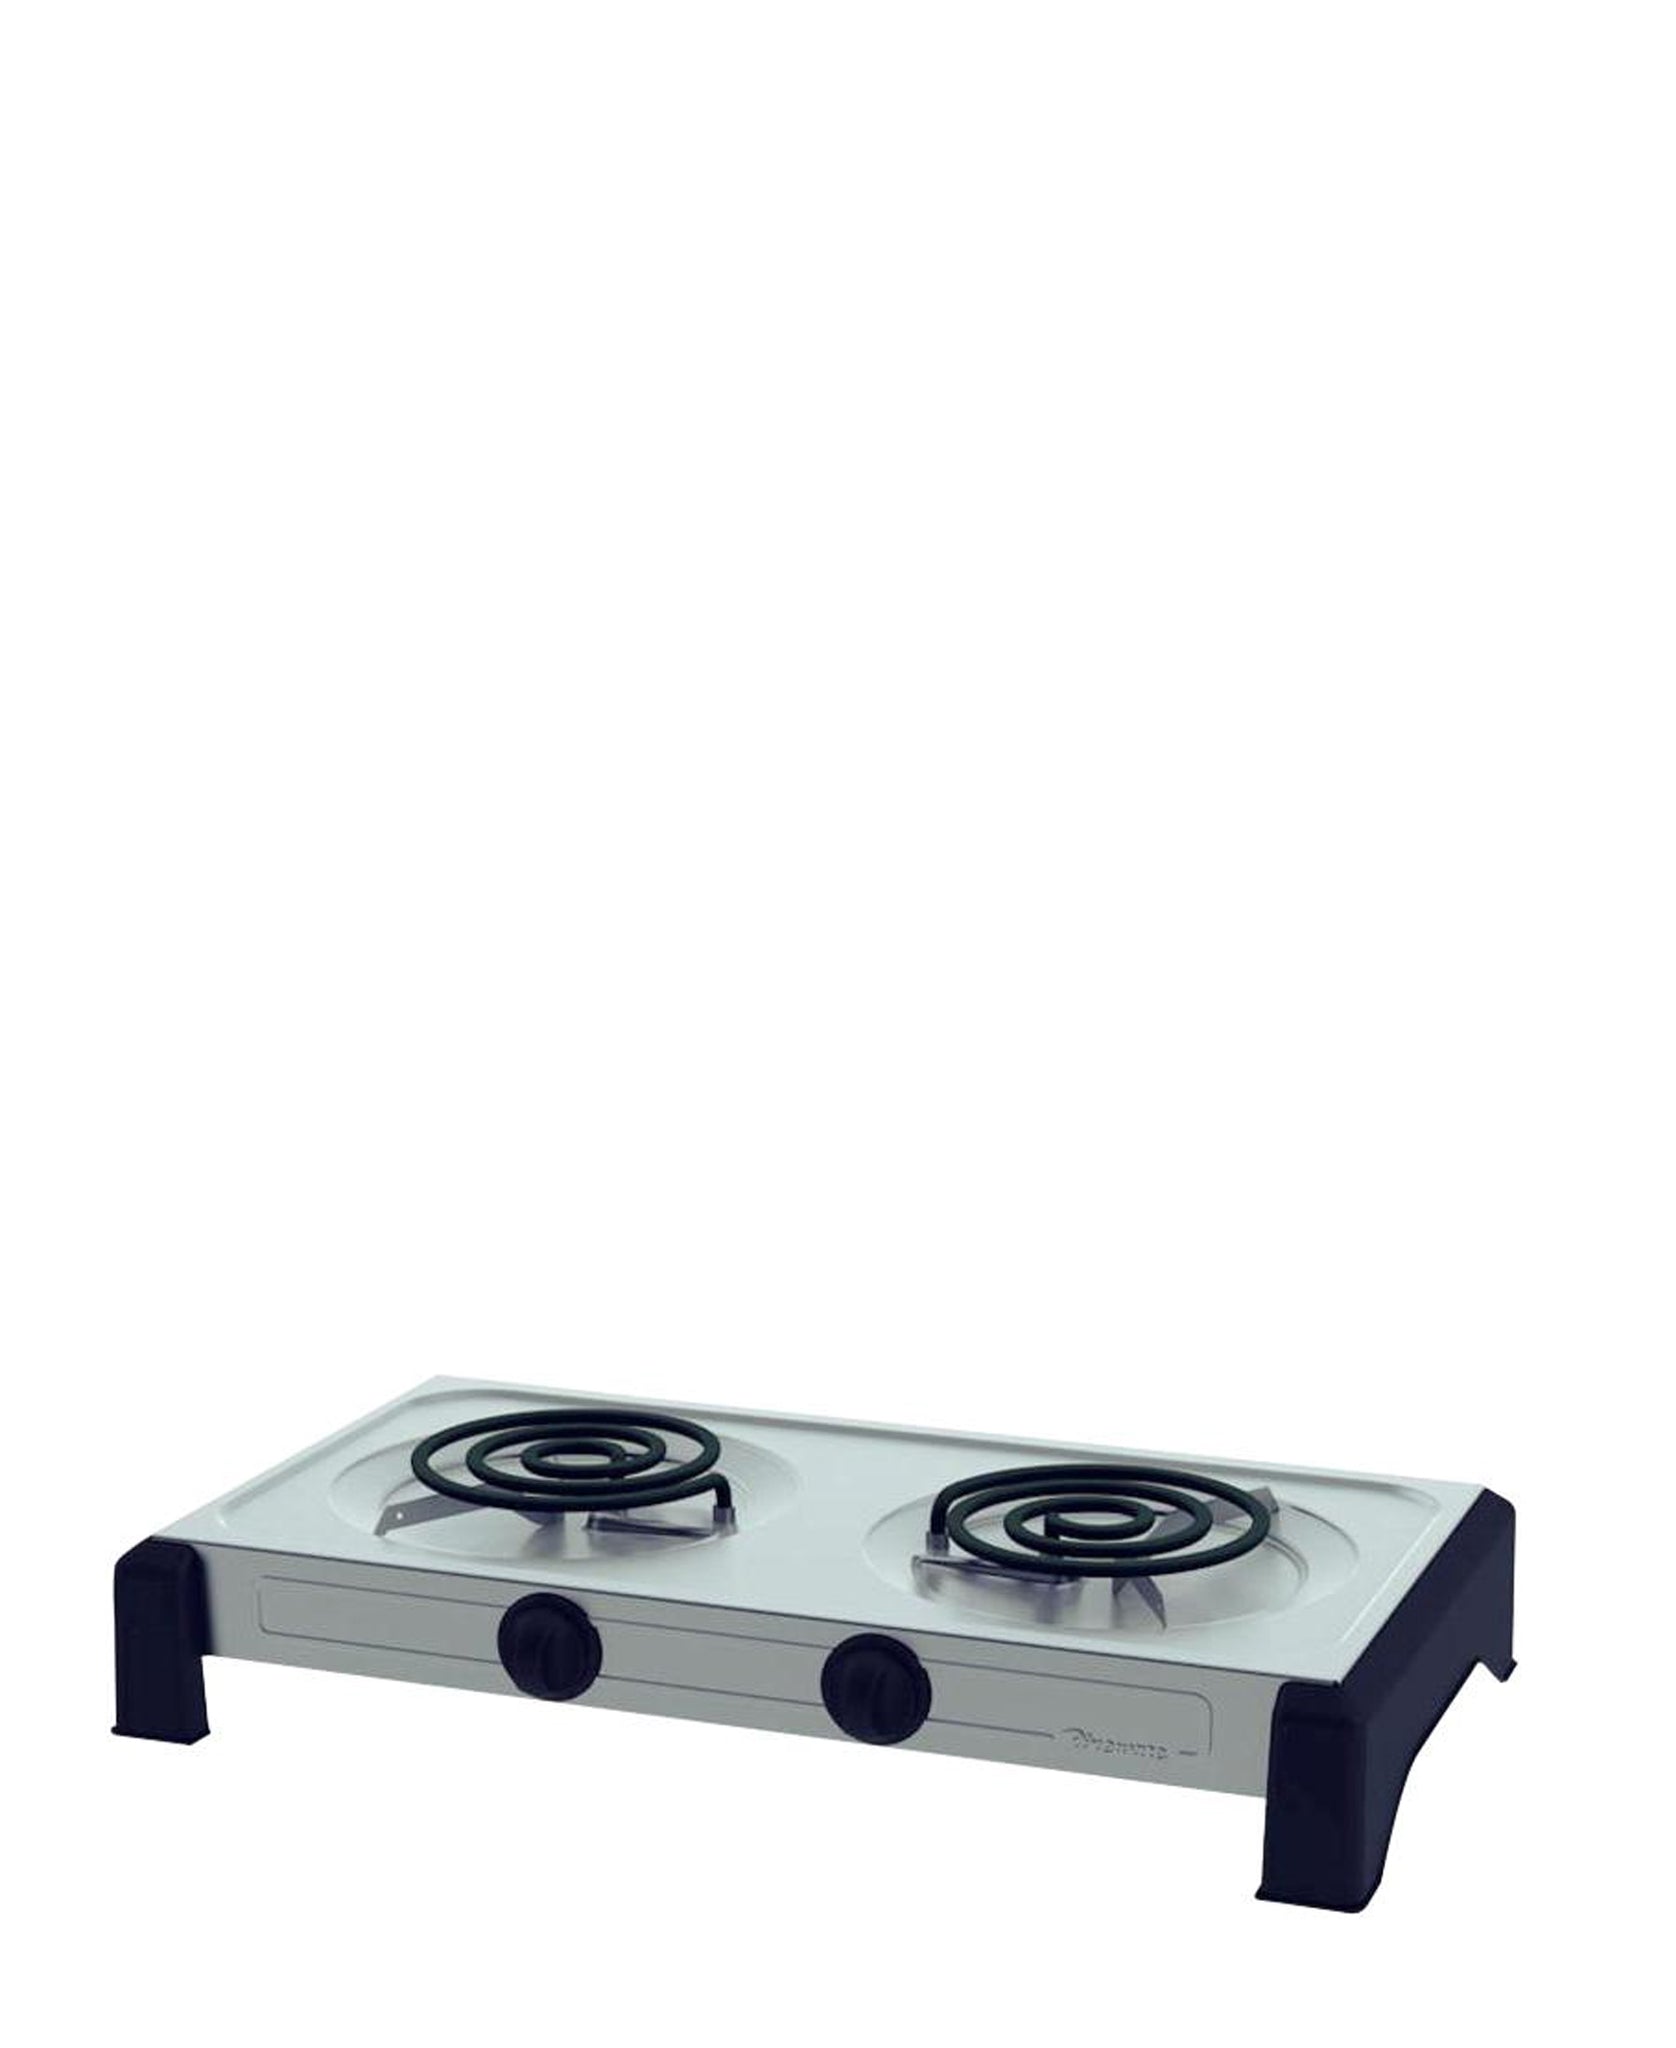 Pineware Hotplate Double Spiral - Silver